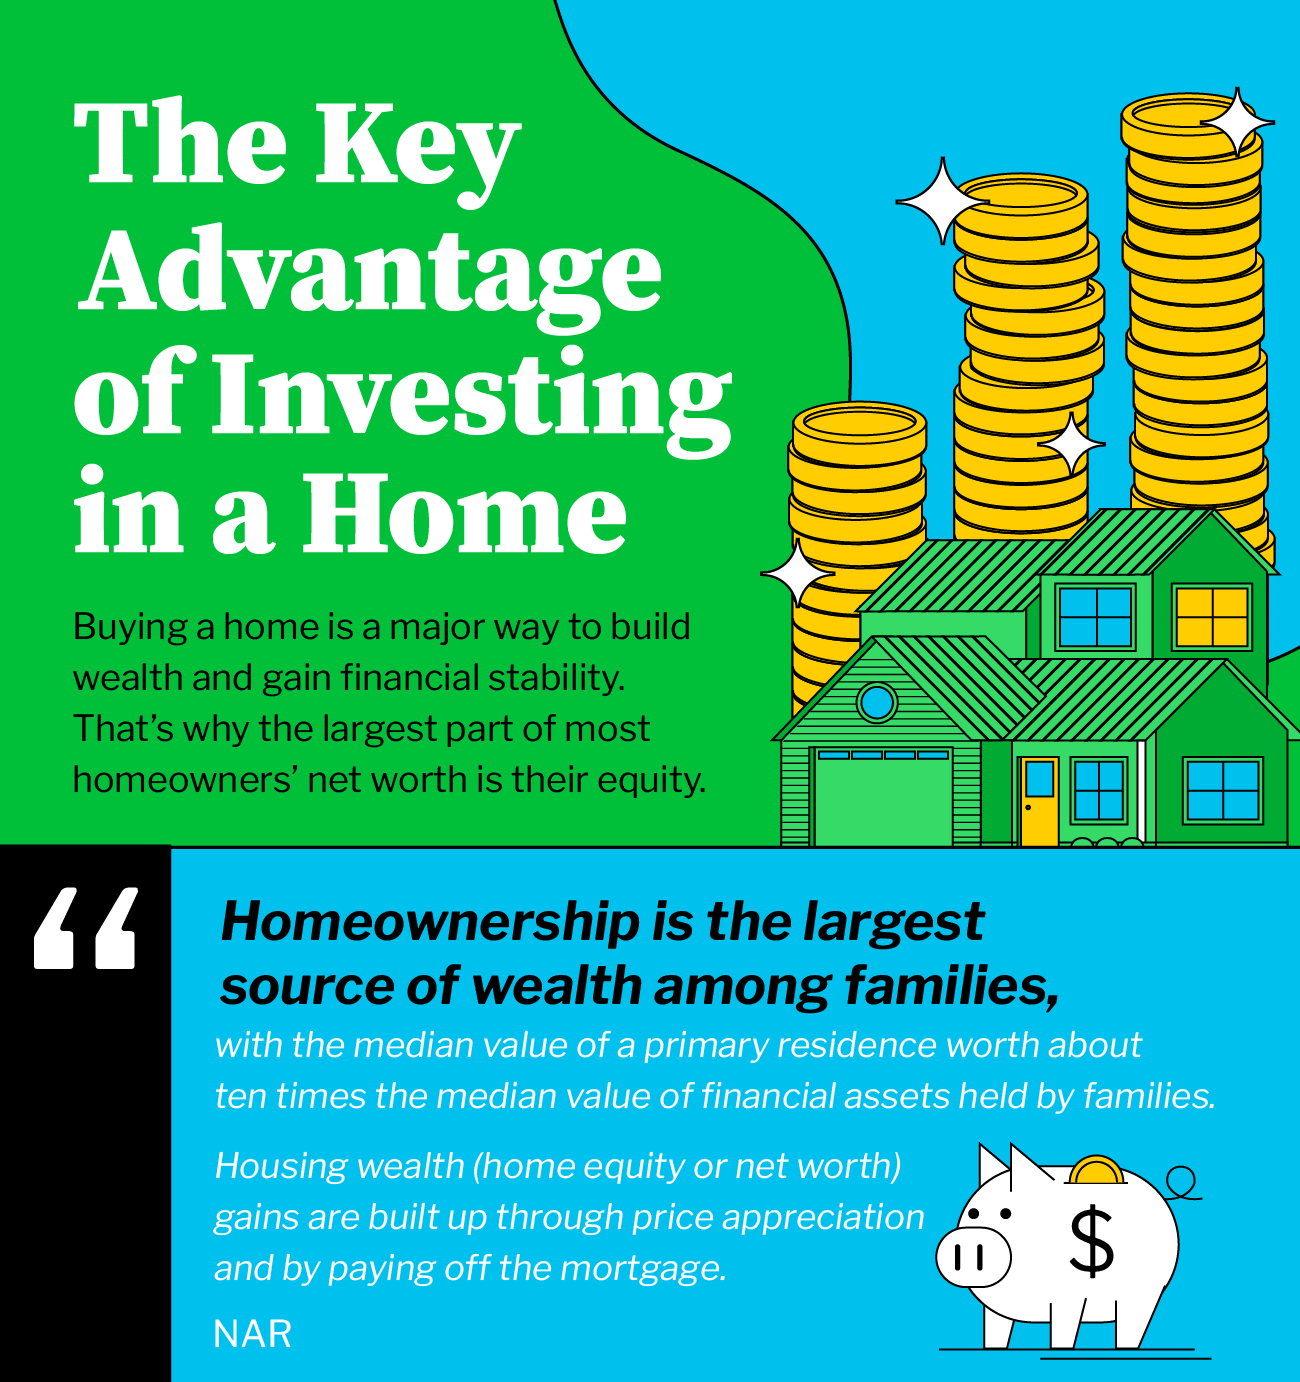 Benefits of owning a Home